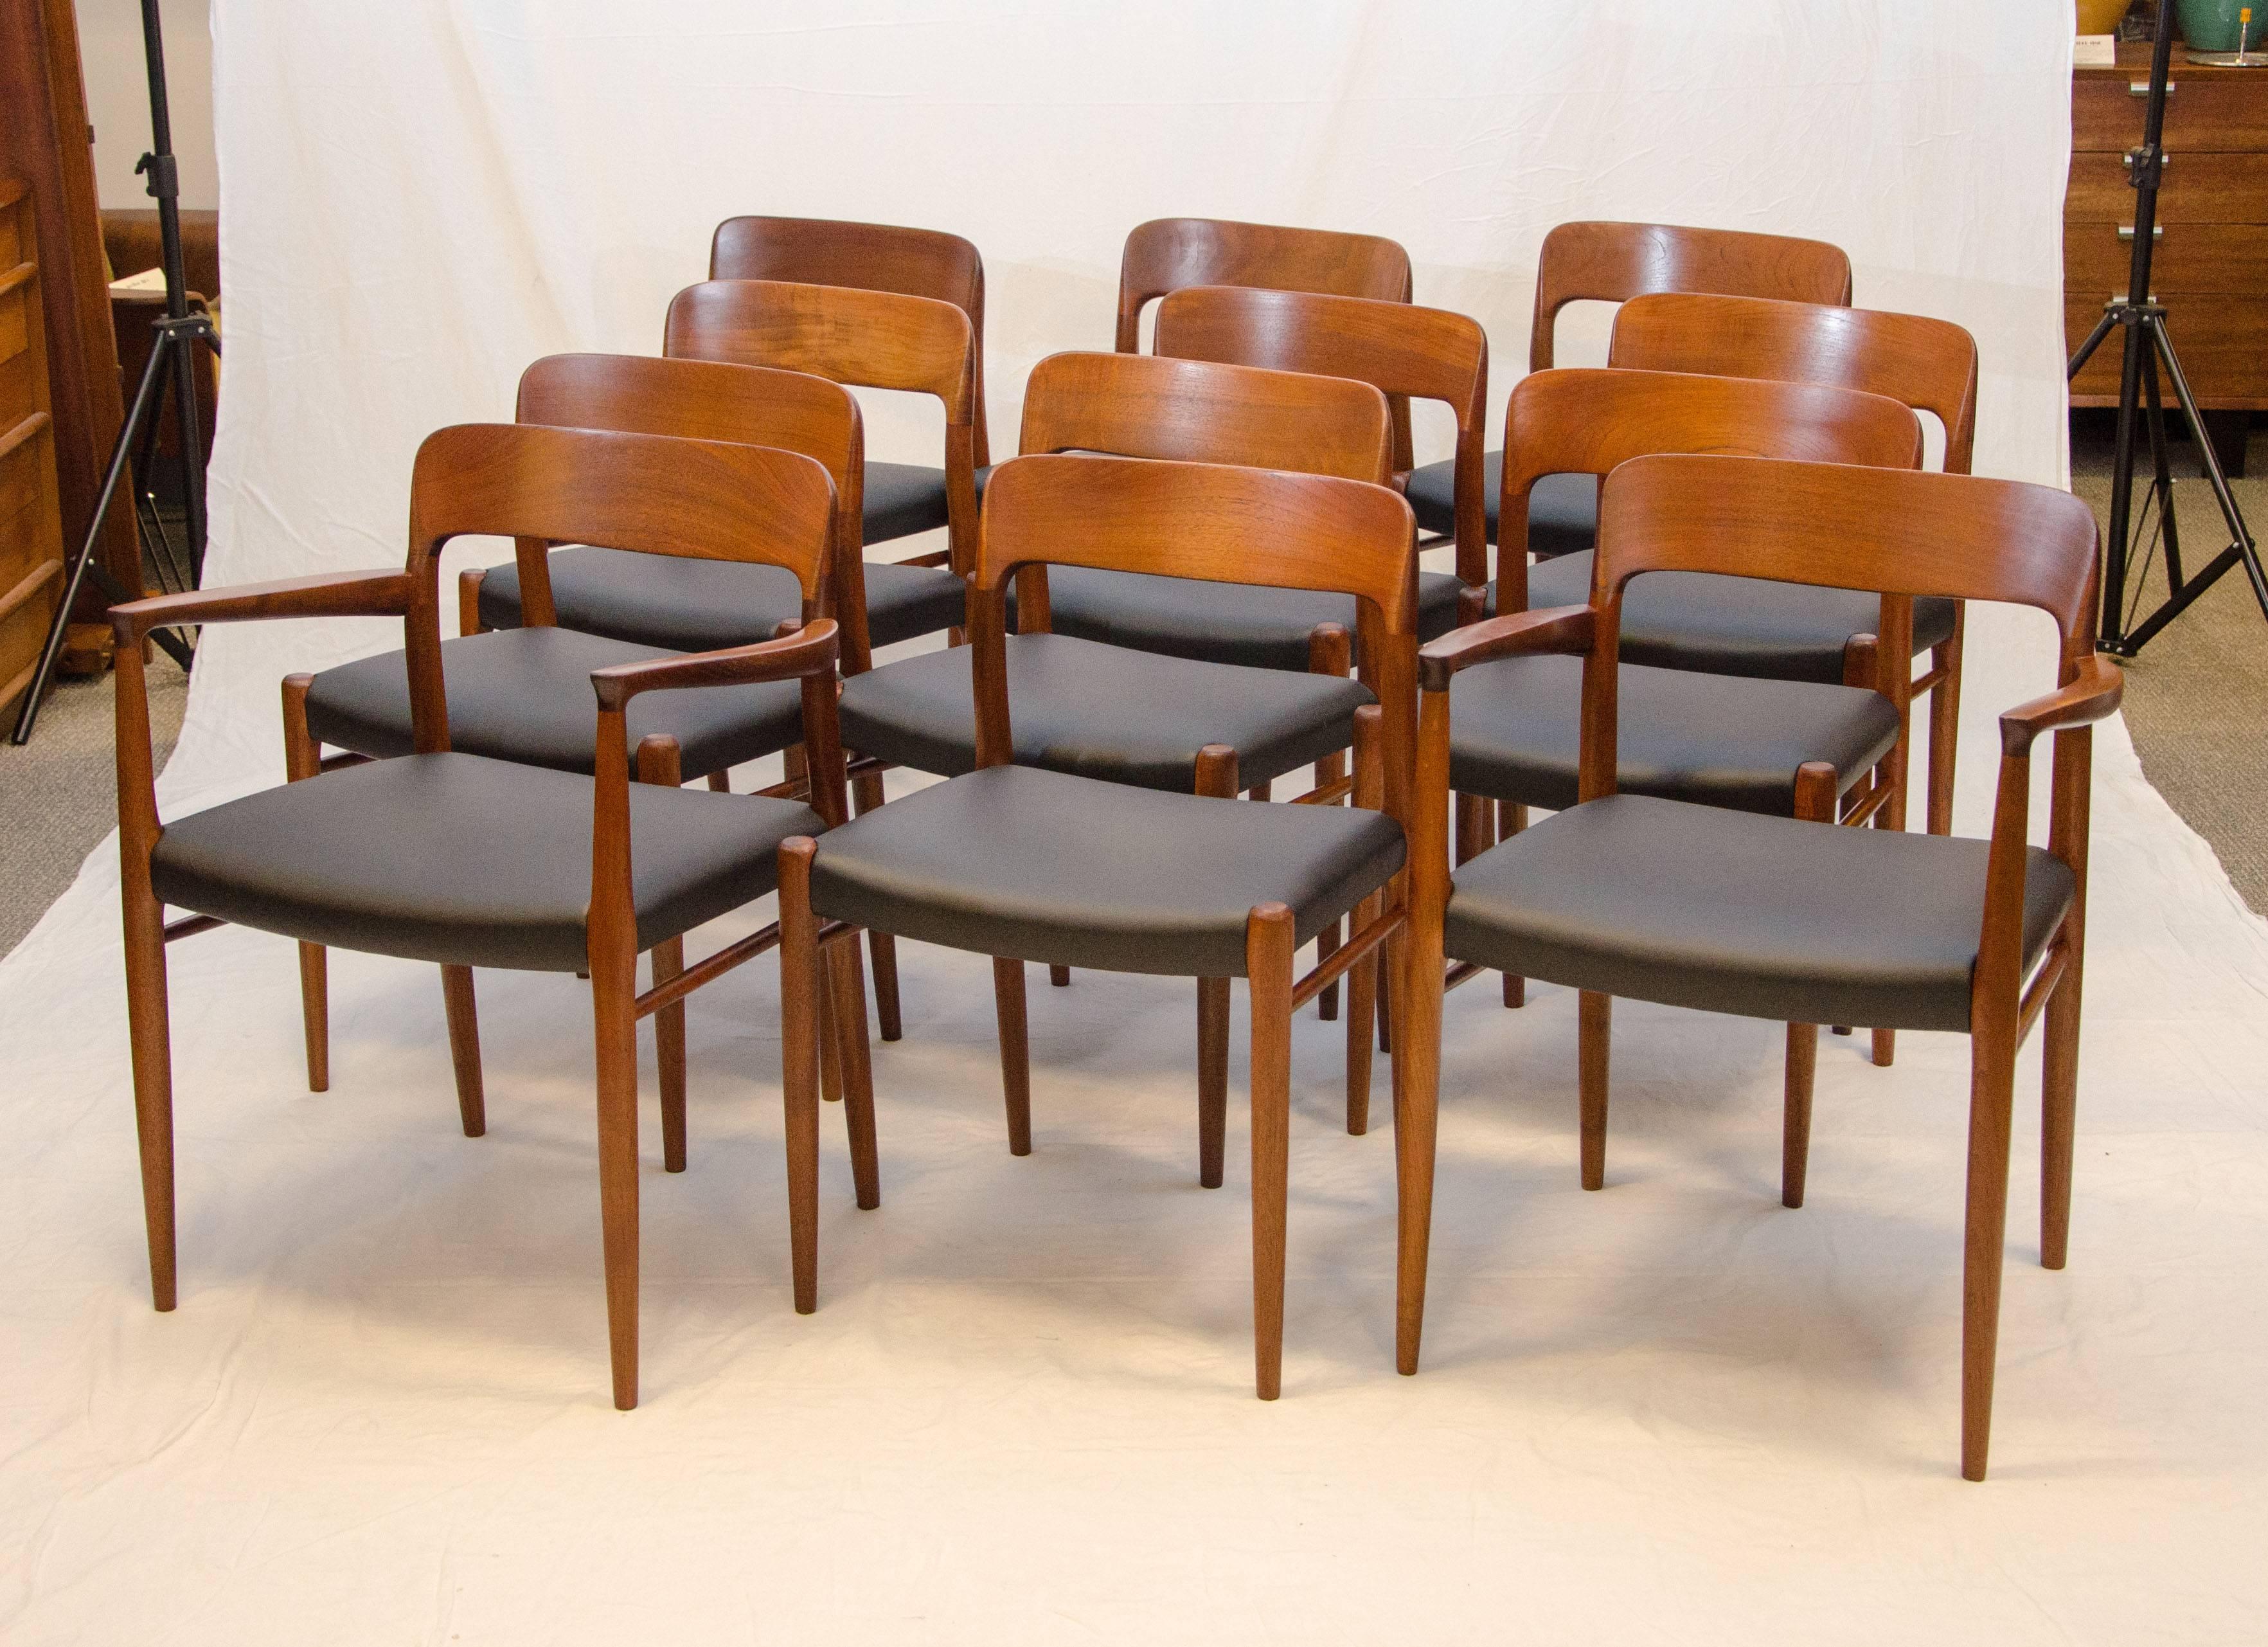 Large set of solid teak Danish dining chairs consisting of two model #56 armchairs and ten model #75 side chairs. The stretchers between the front legs and back allow for extra strength. Seats have been re-upholstered with low maintenance high